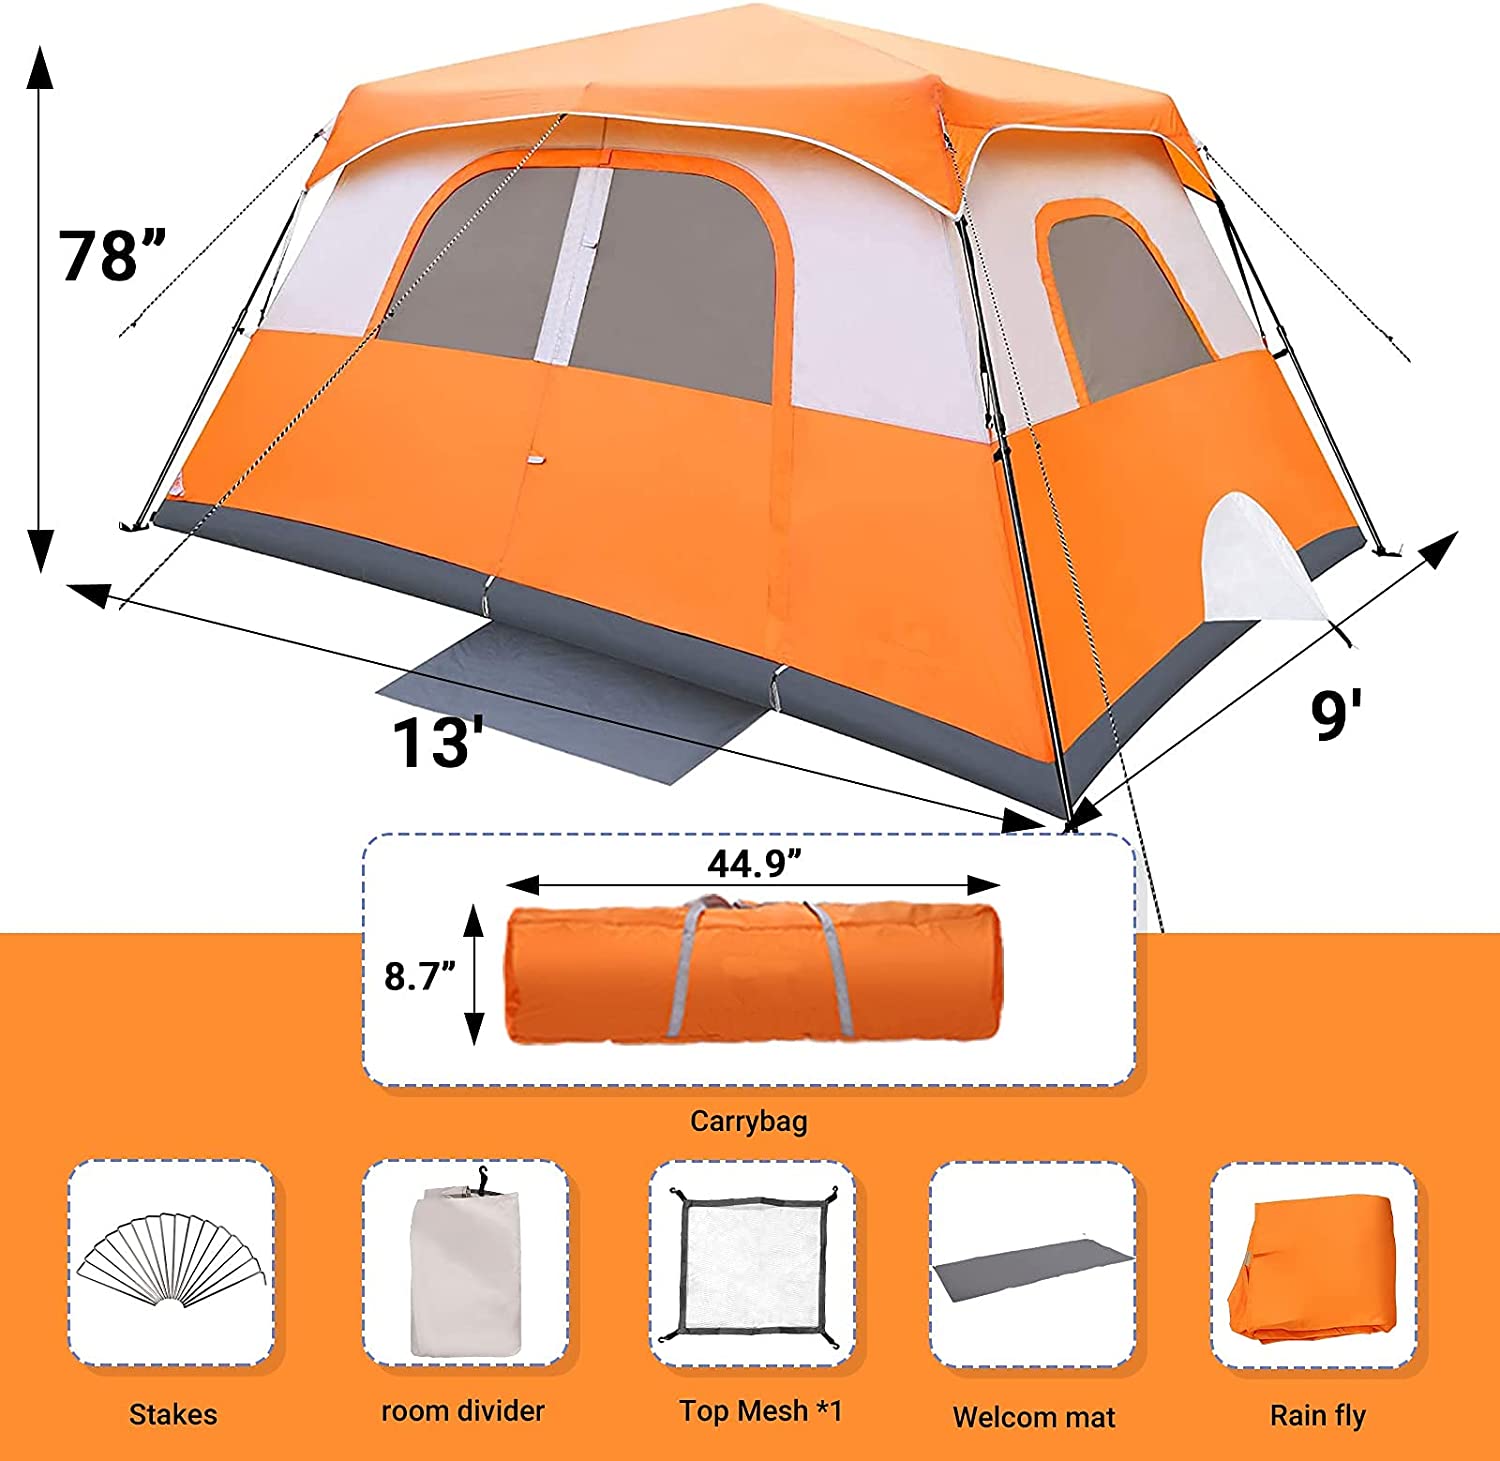 Koop 8 Persoons Familie Instant Camping Tent. 8 Persoons Familie Instant Camping Tent Prijzen. 8 Persoons Familie Instant Camping Tent Brands. 8 Persoons Familie Instant Camping Tent Fabrikant. 8 Persoons Familie Instant Camping Tent Quotes. 8 Persoons Familie Instant Camping Tent Company.